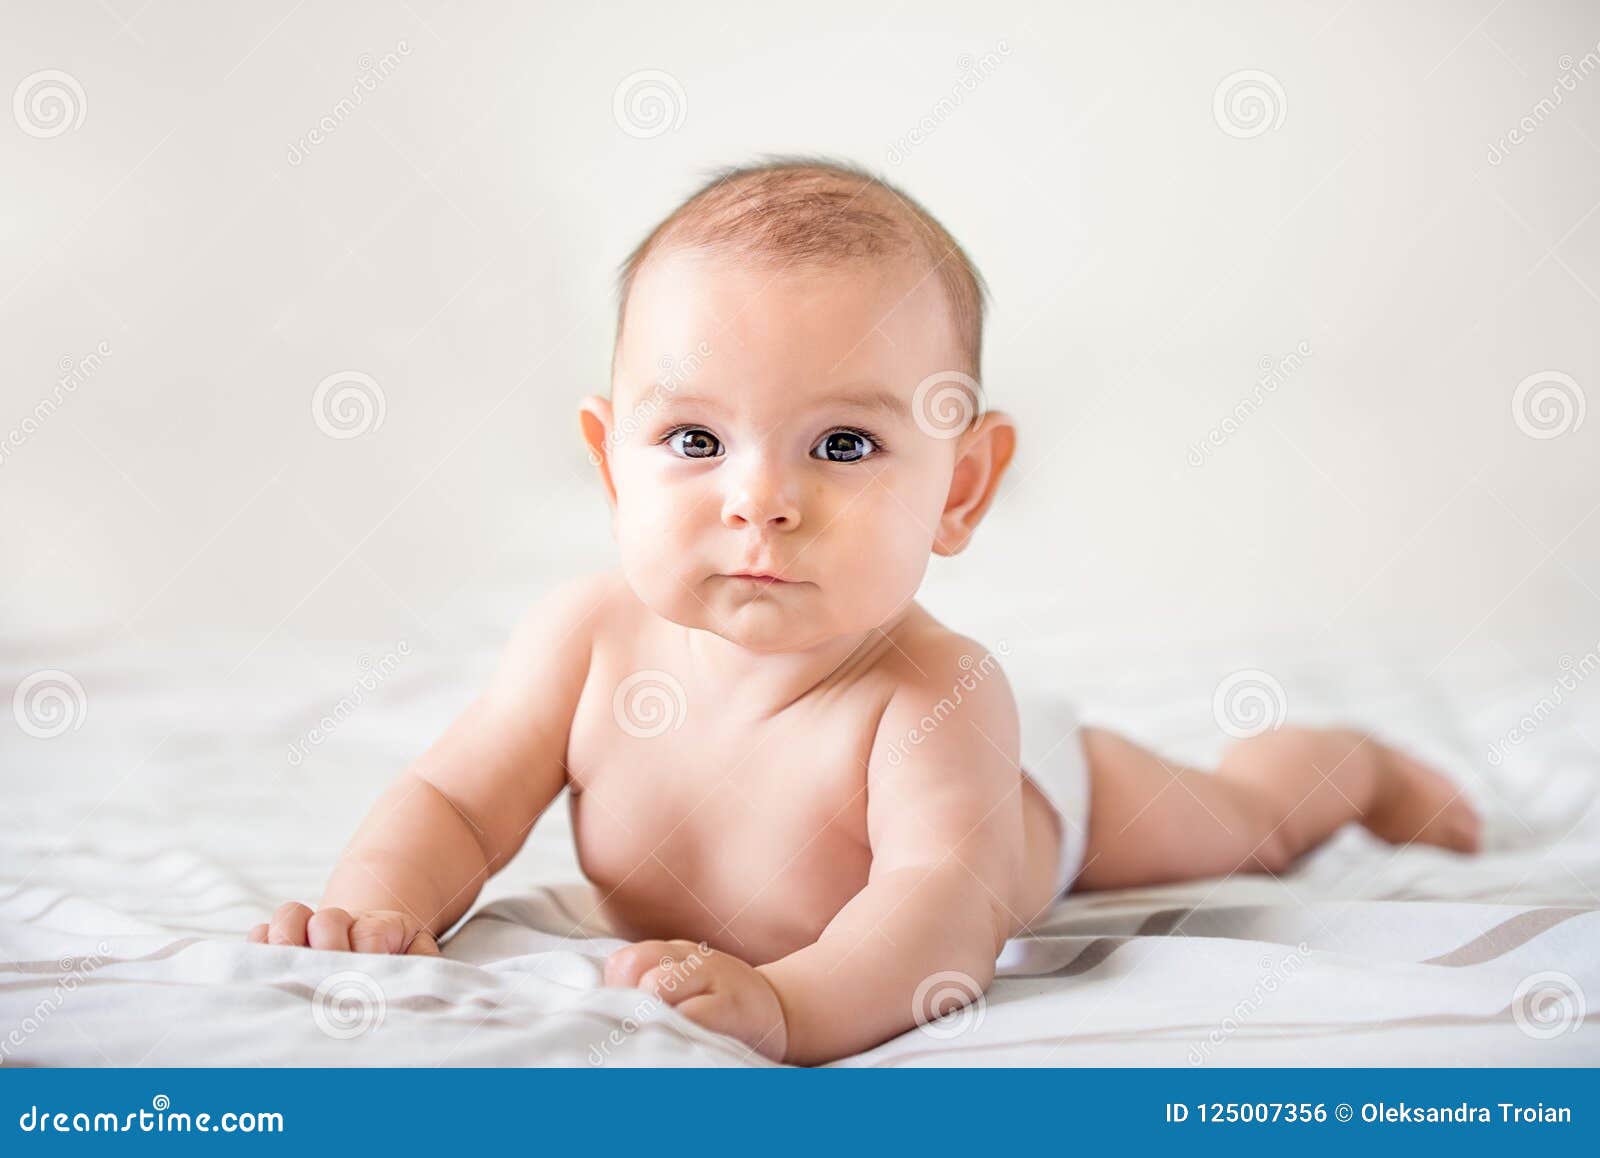 smiling happy newborn infant baby tummy time on bed bright airy copy space childhood